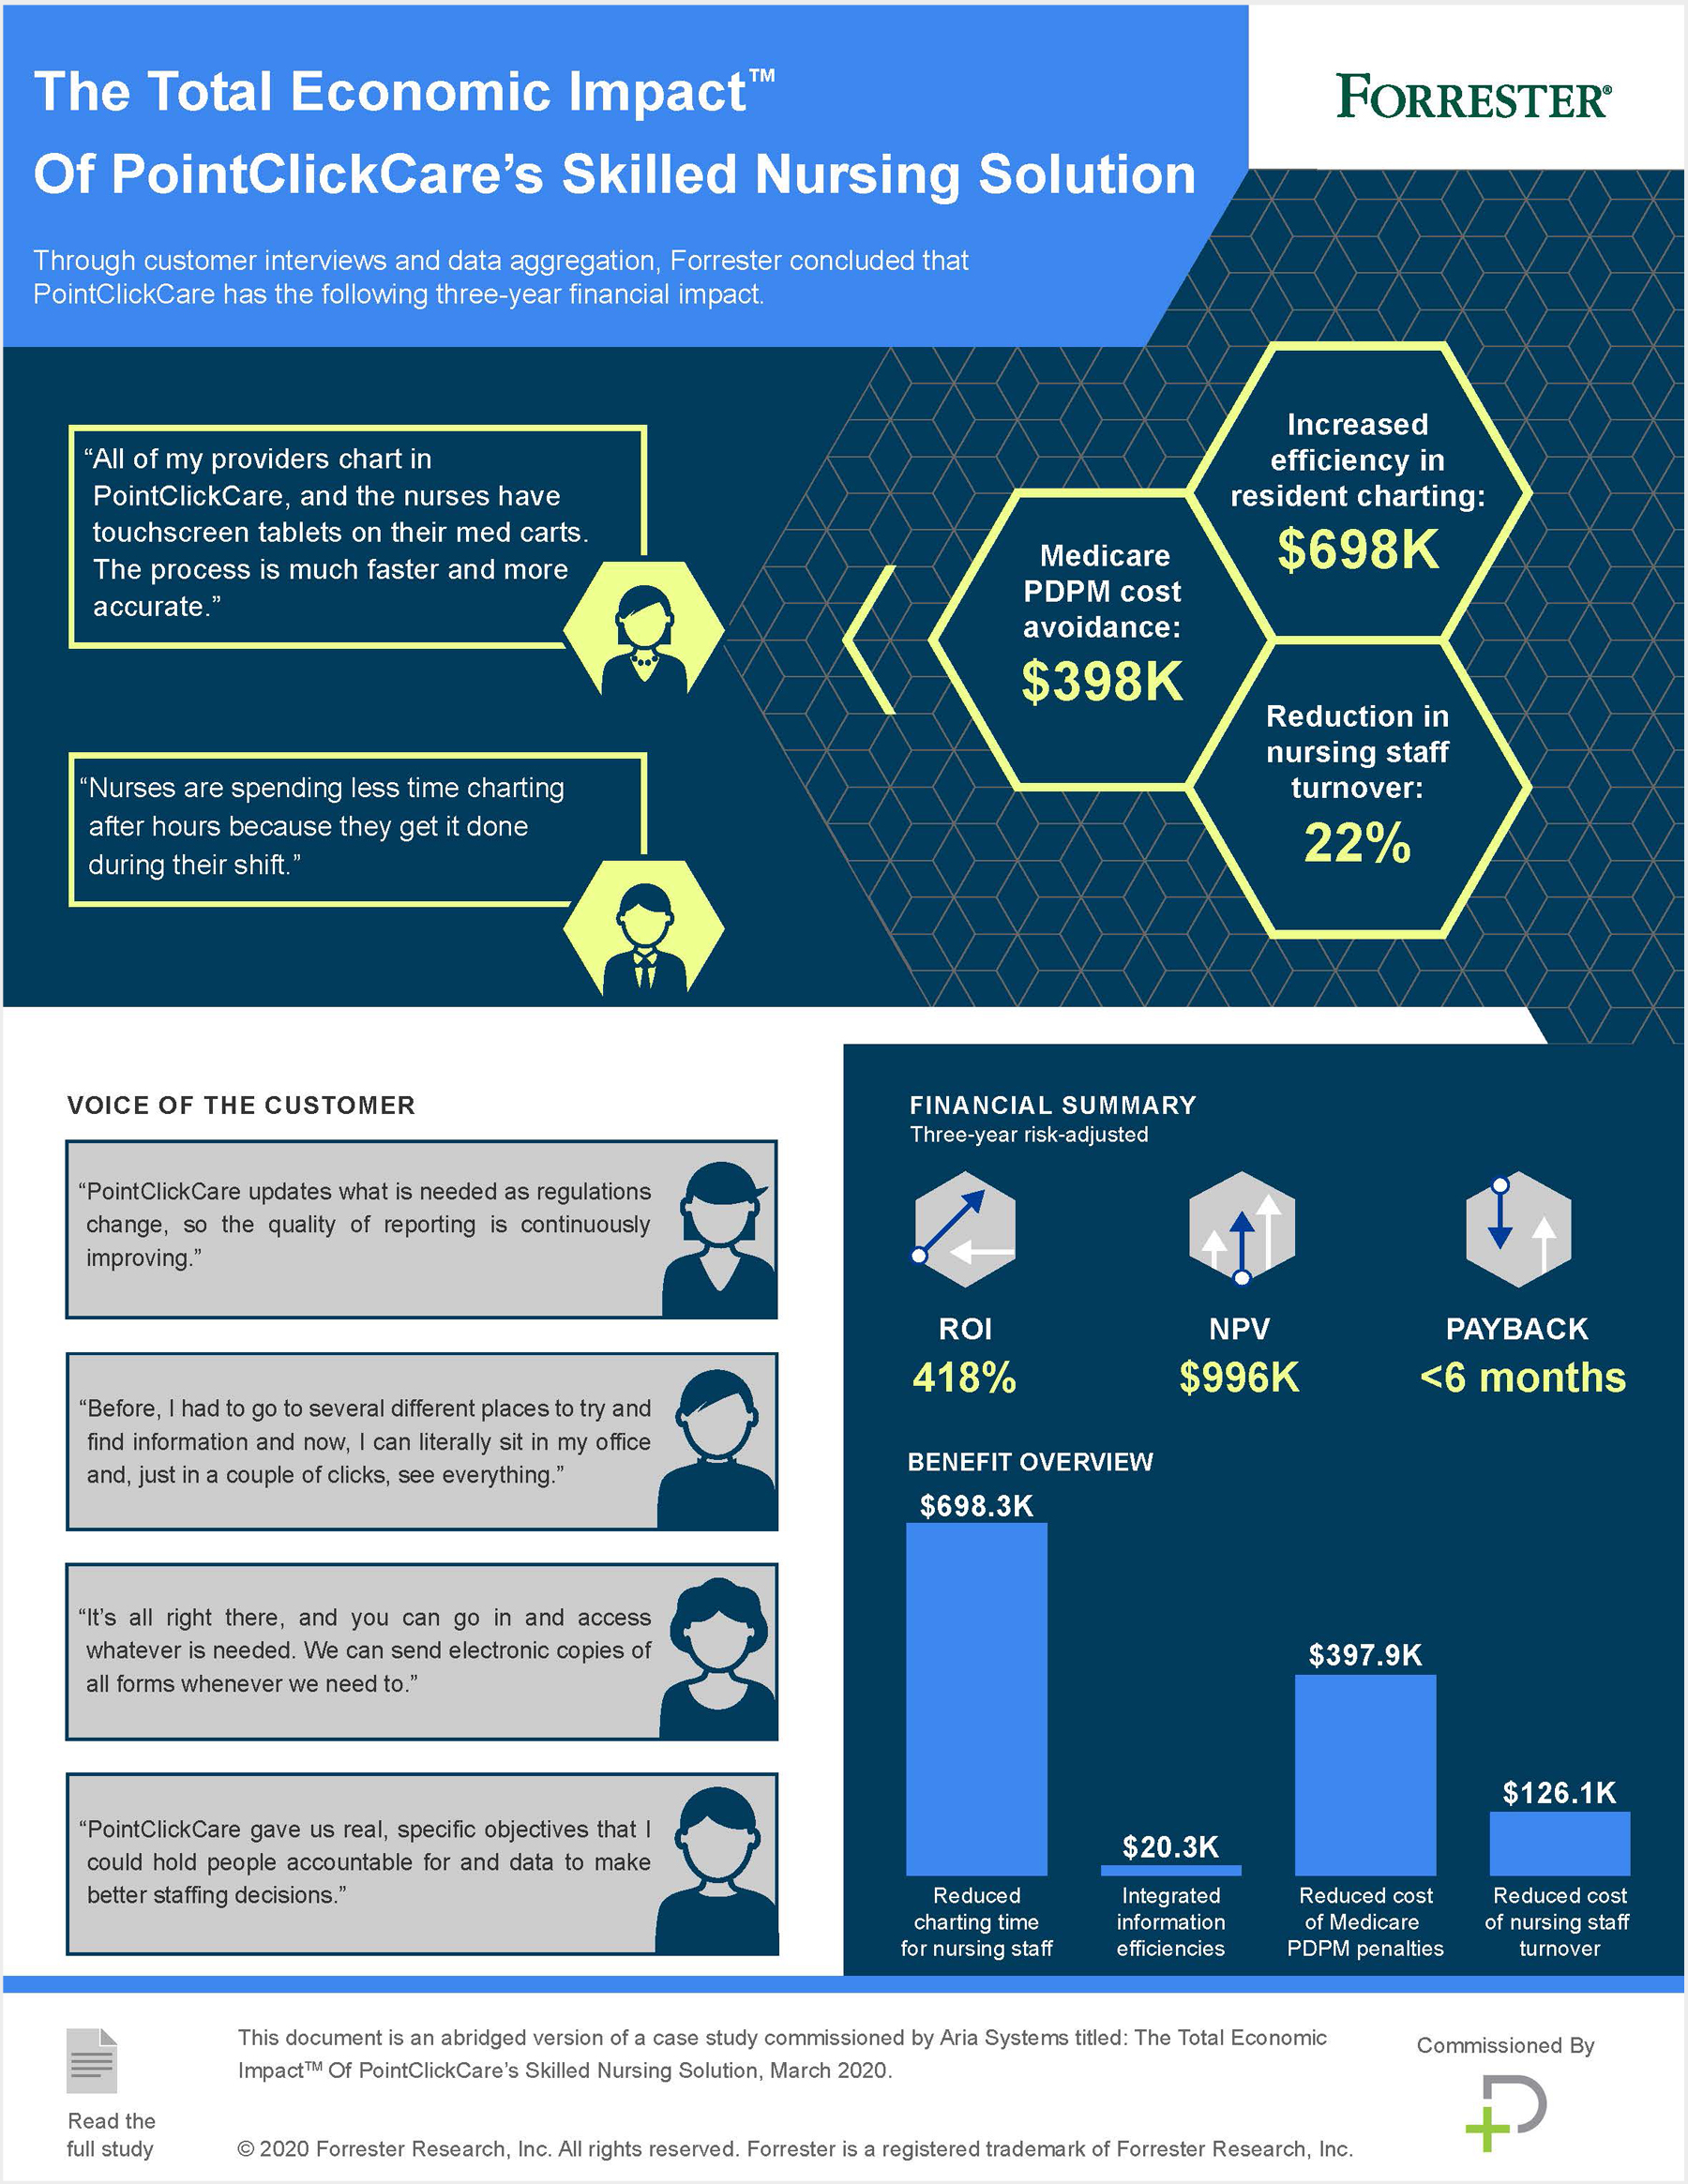 The Total Economic Impact of PointClickCare's Skilled Nursing Solution Infographic thumbn image